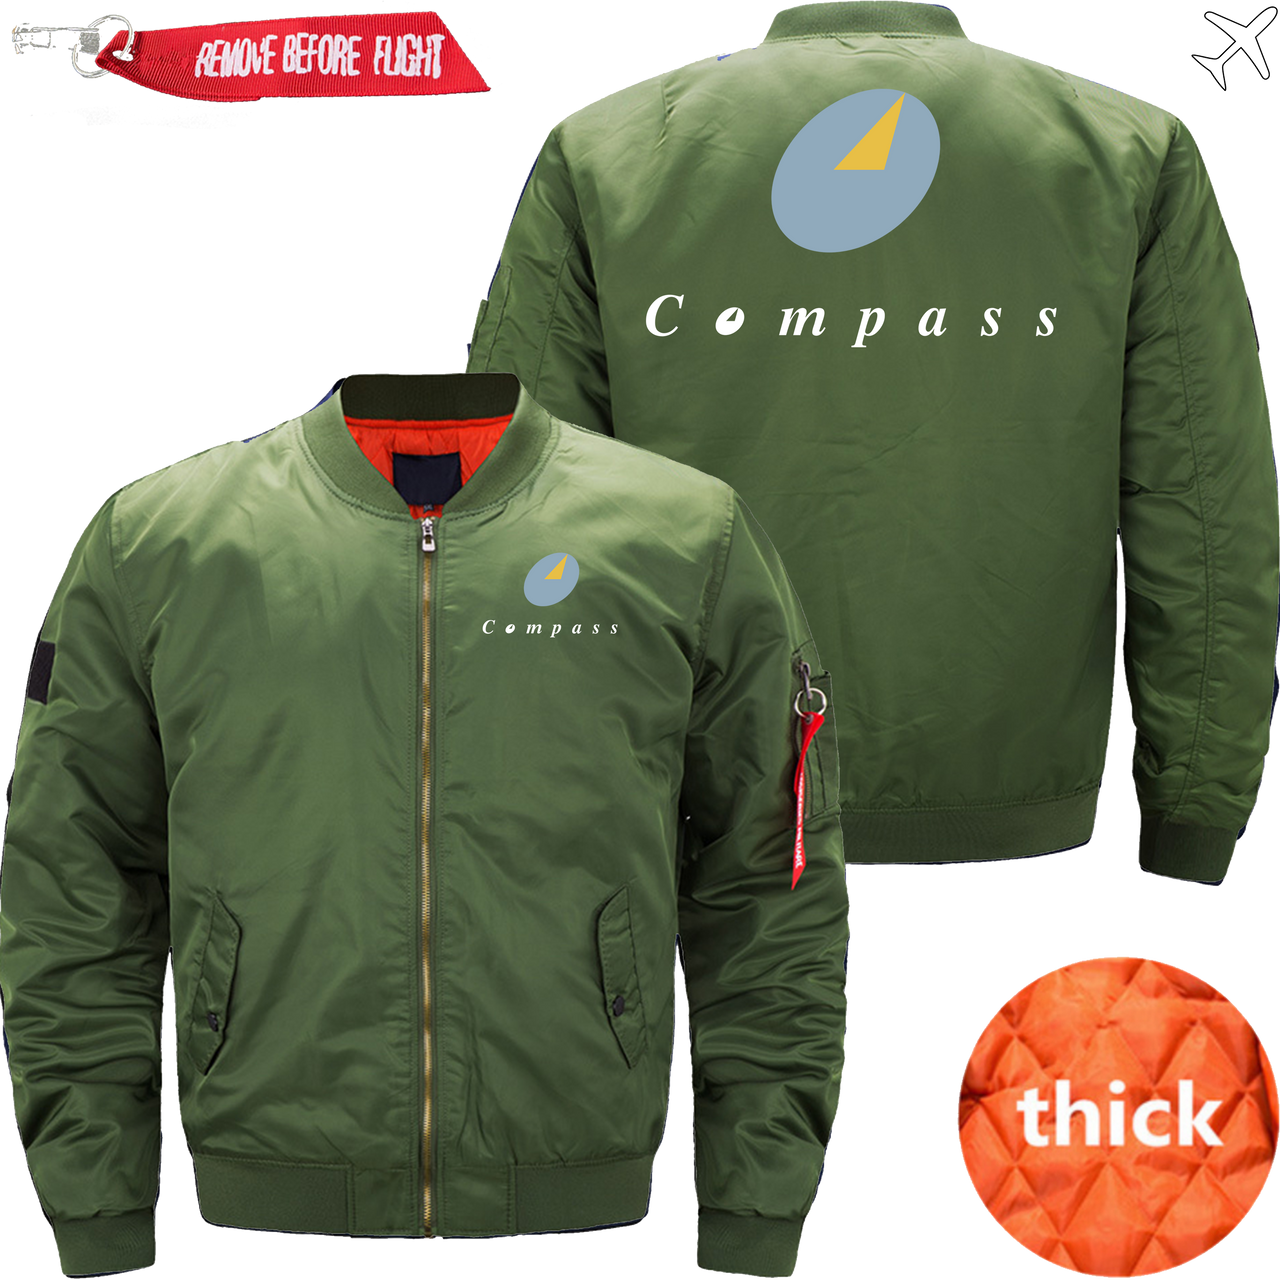 COMPASS AIRLINE JACKET